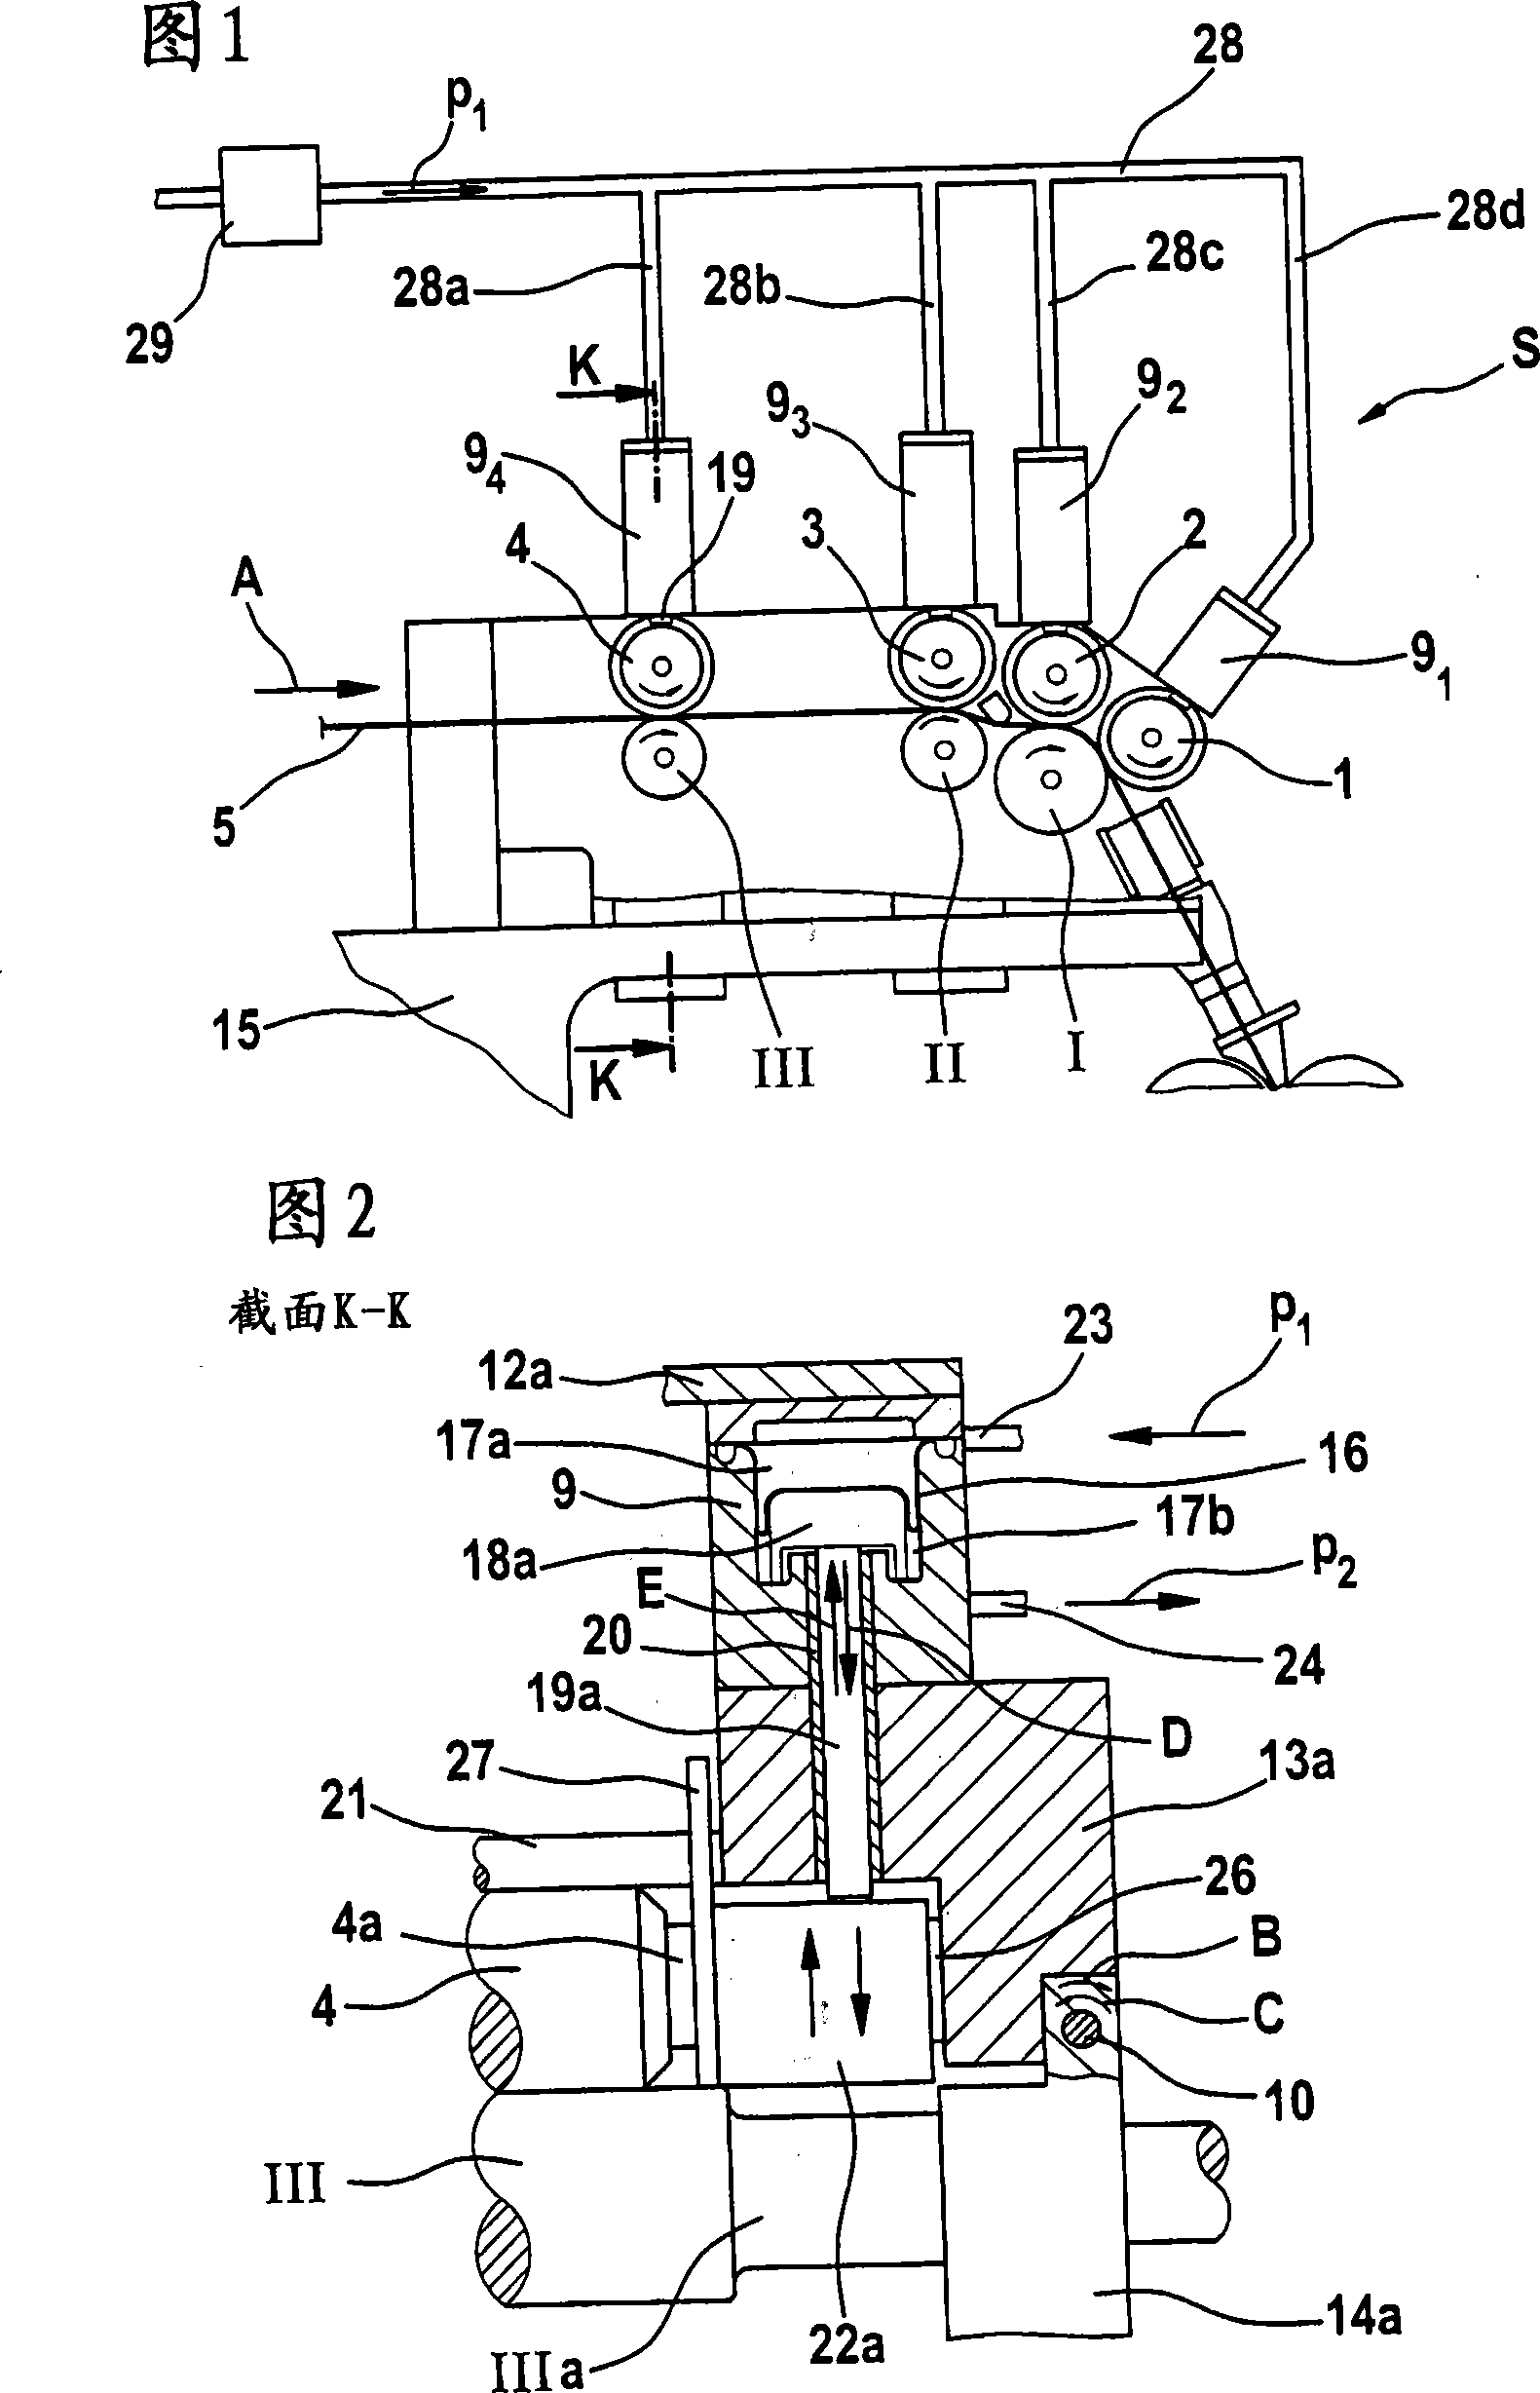 Apparatus on a drafting system of a spinning room machine, for weighting drafting system rollers